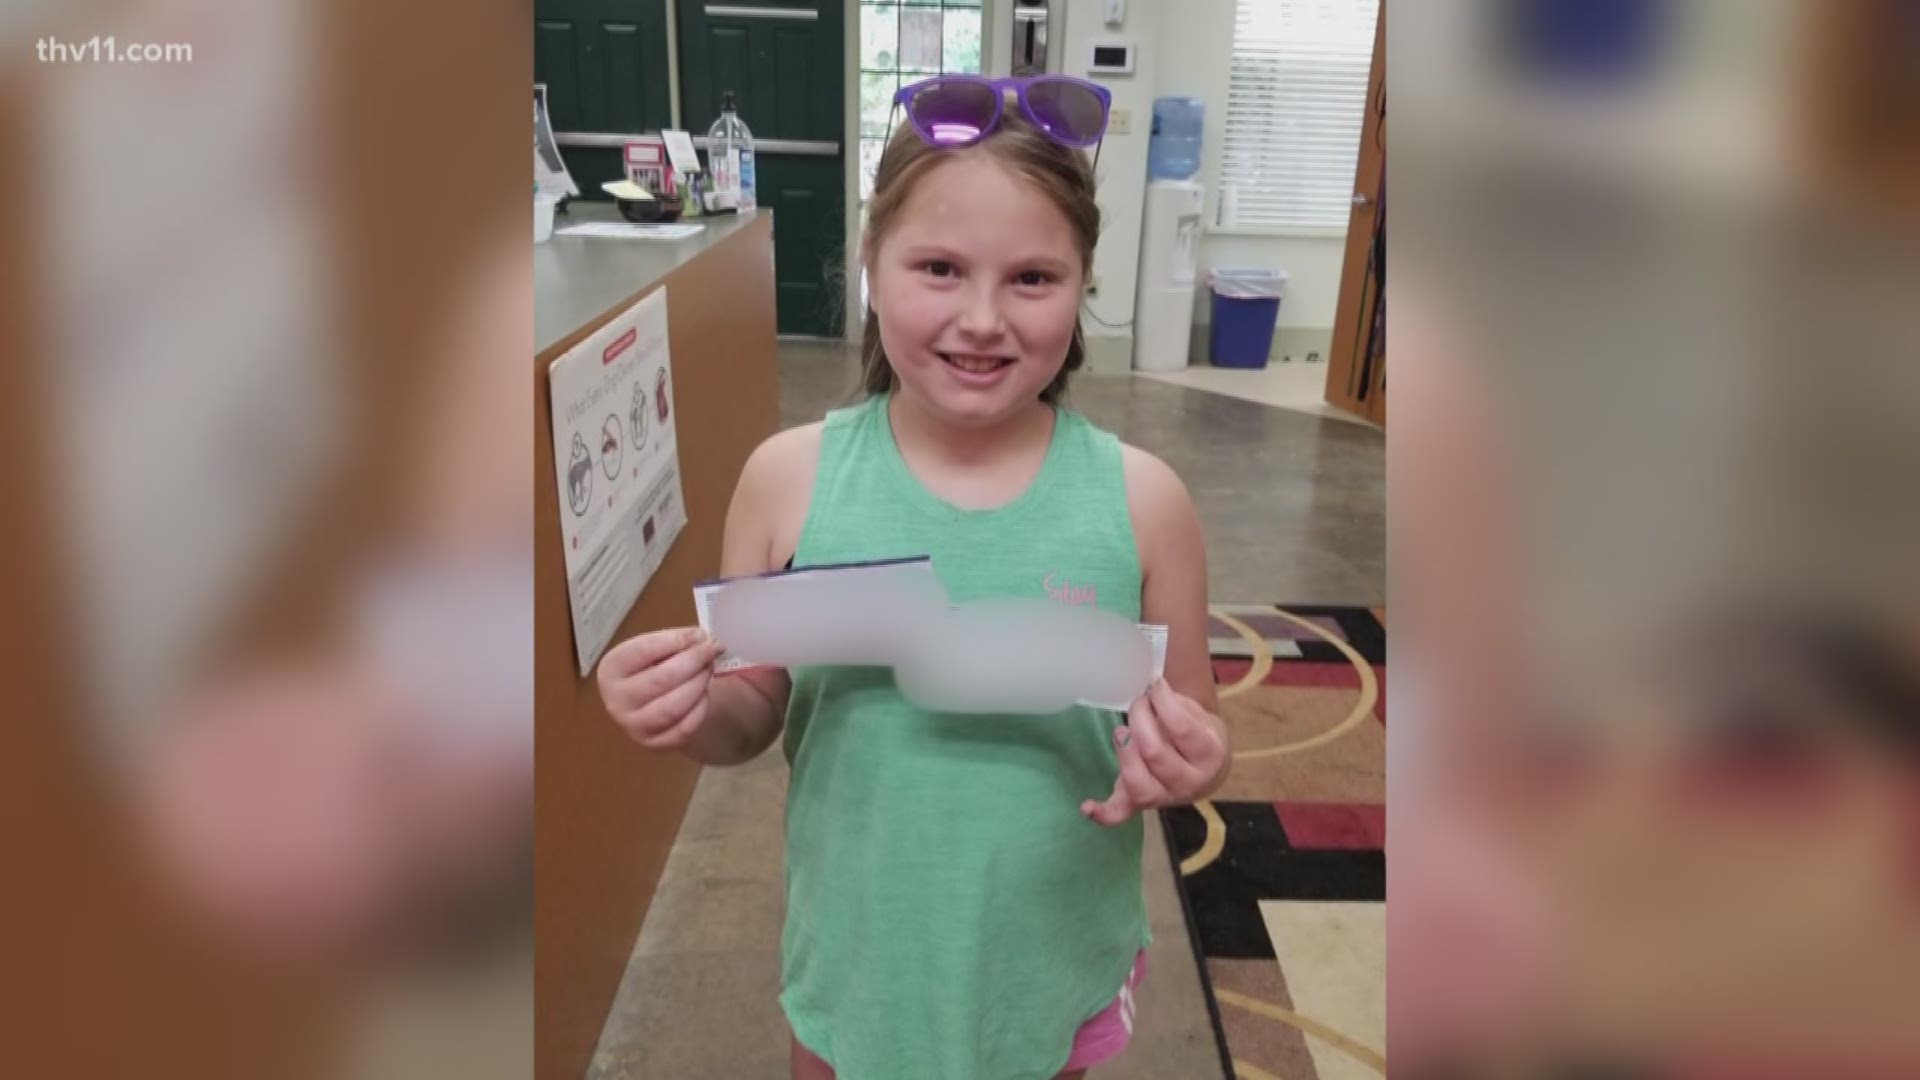 A 9-year-old girl is making some serious bank with her annual lemonade stand and she's giving that cash directly to the humane society.